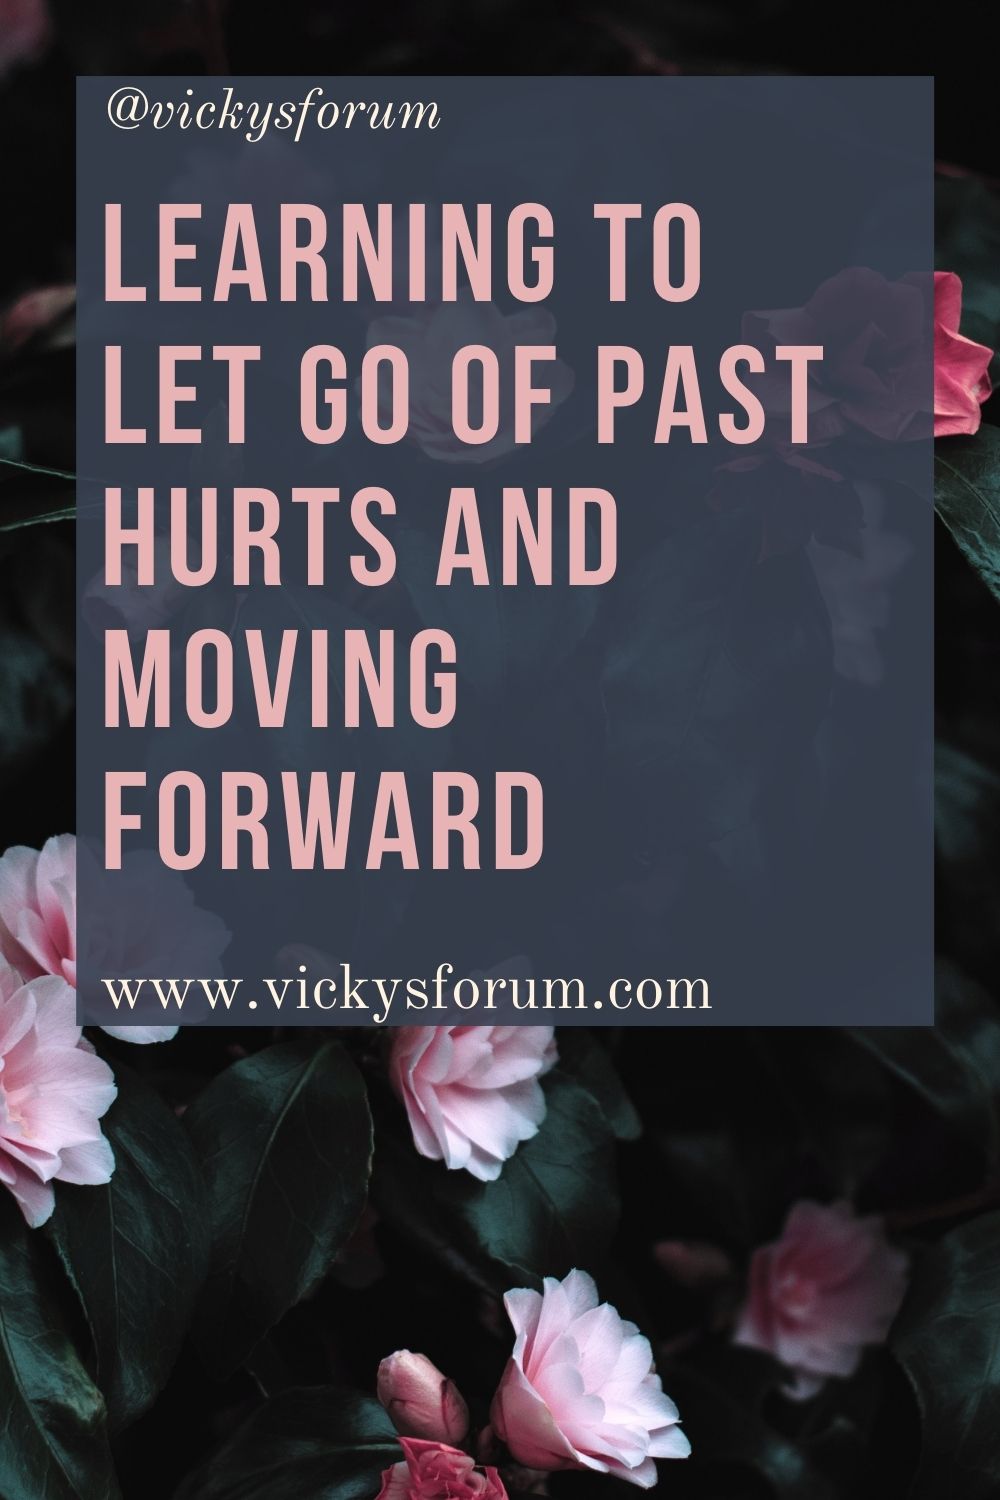 Let go and move forward